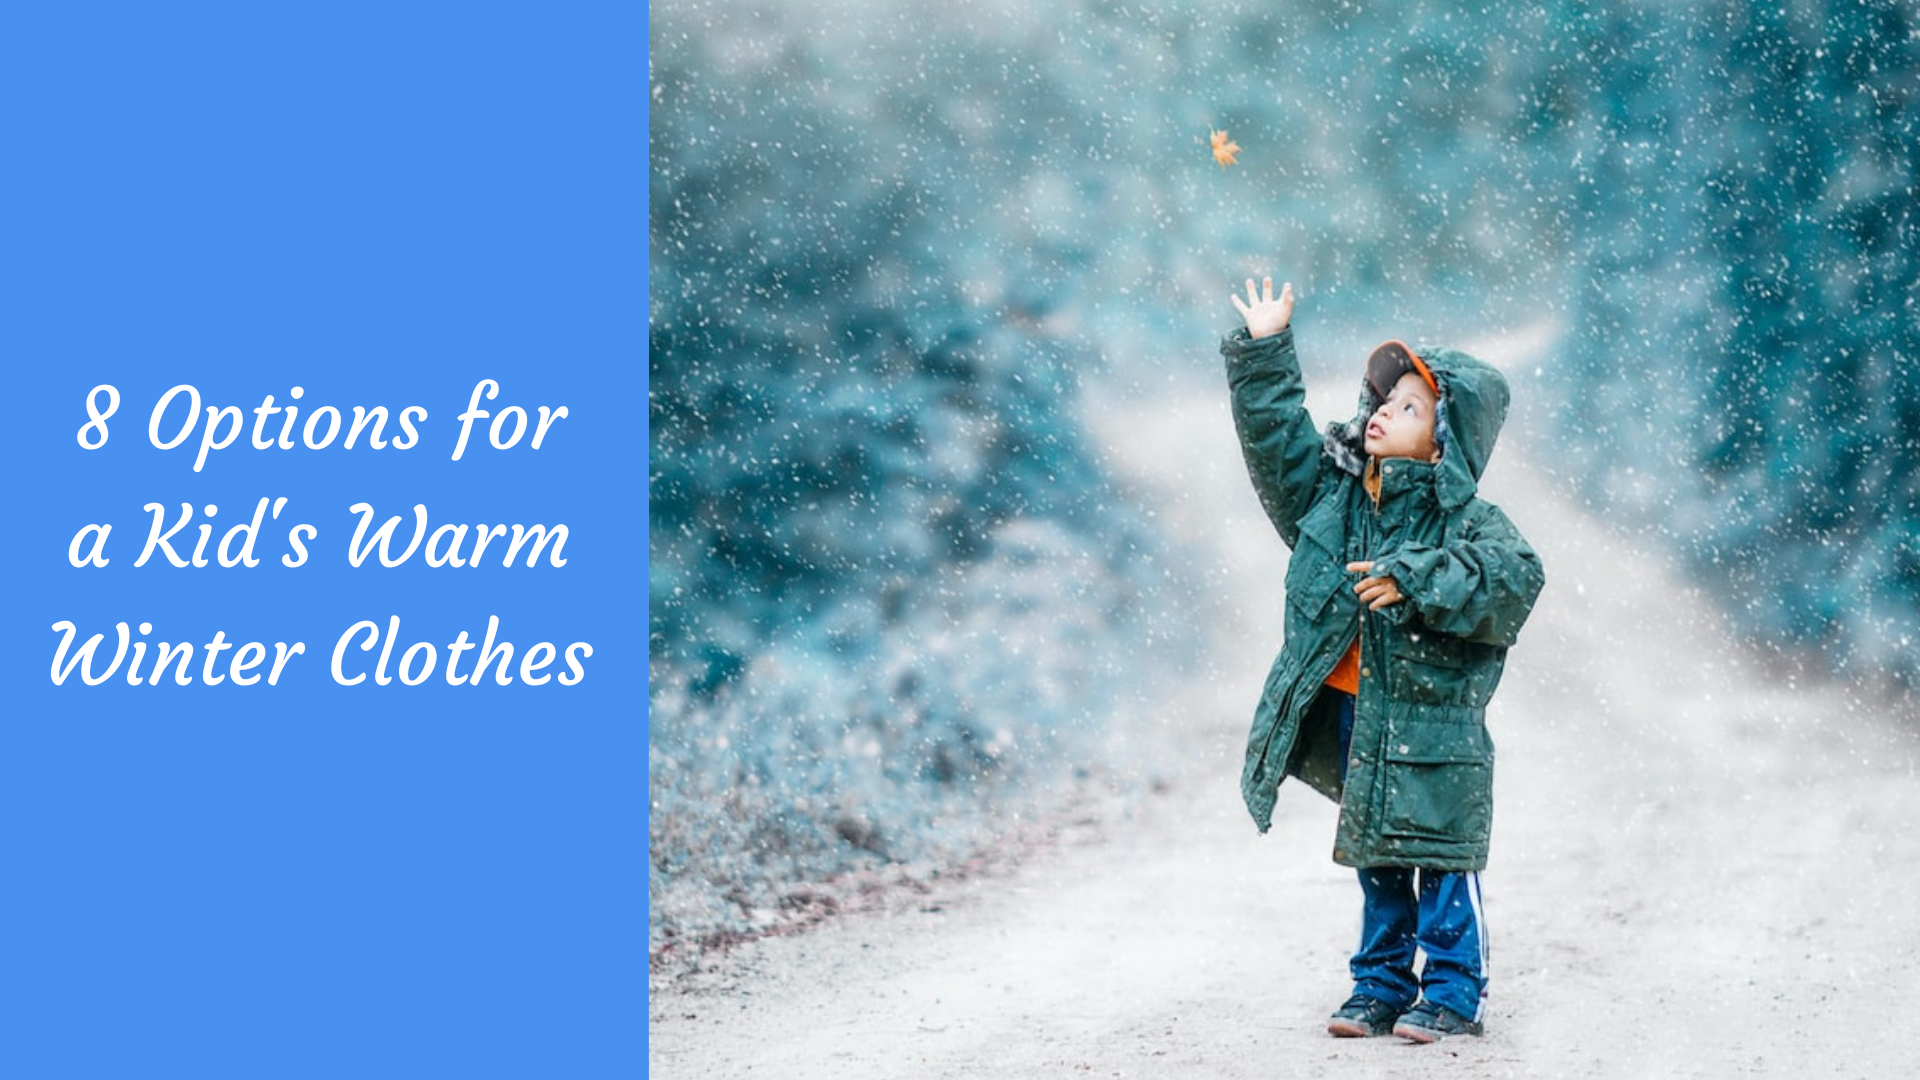 8 Options for a Kid's Warm Winter Clothes - The Kosha Journal